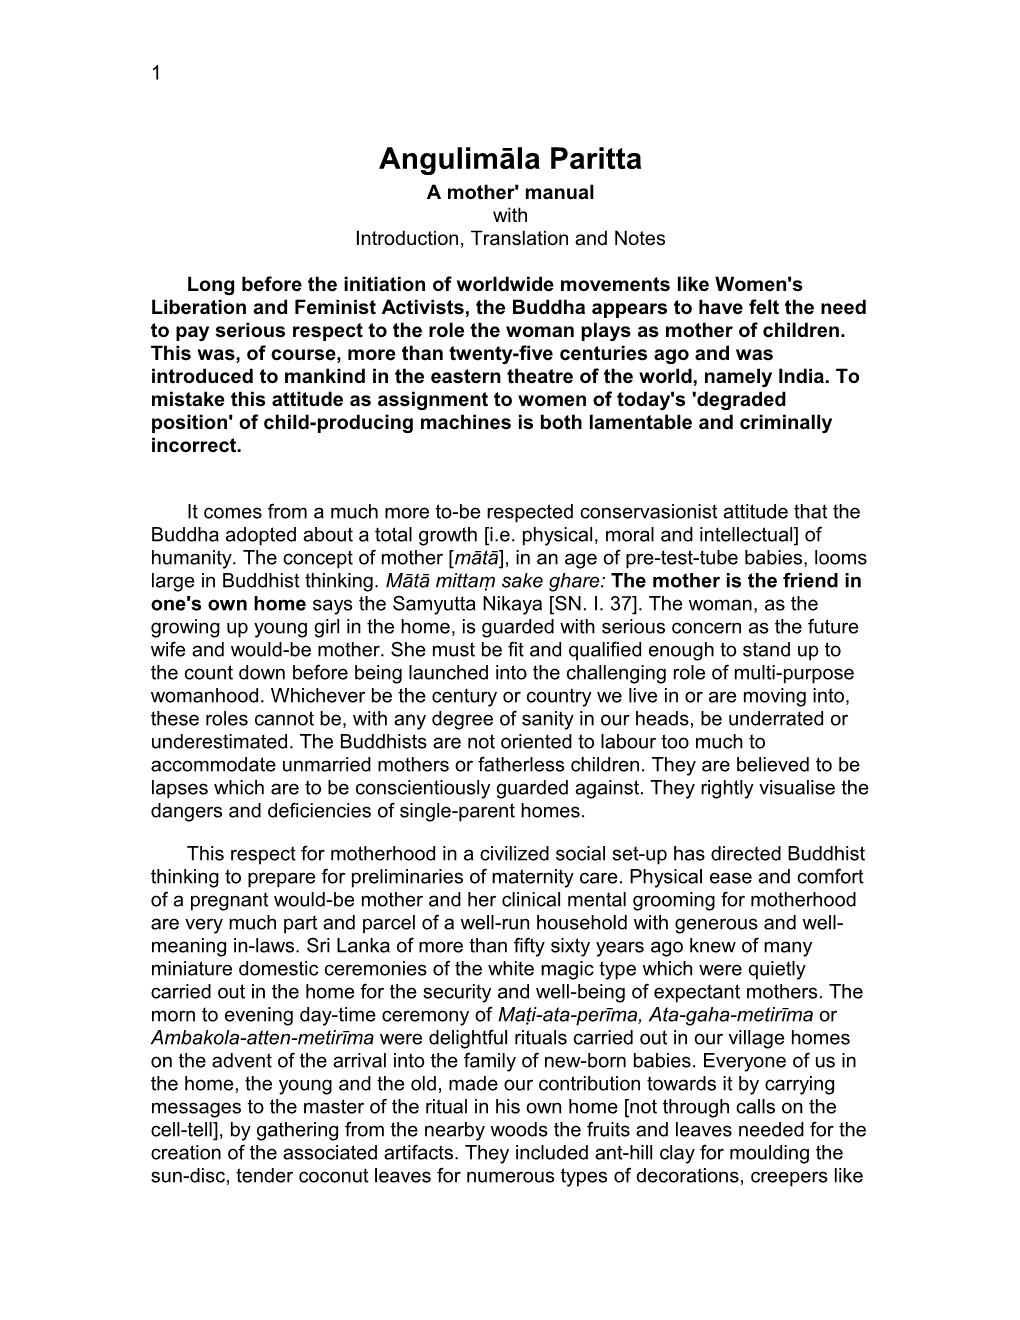 Angulimāla Paritta - a Mother' Manual, with Introduction, Translation and Notes